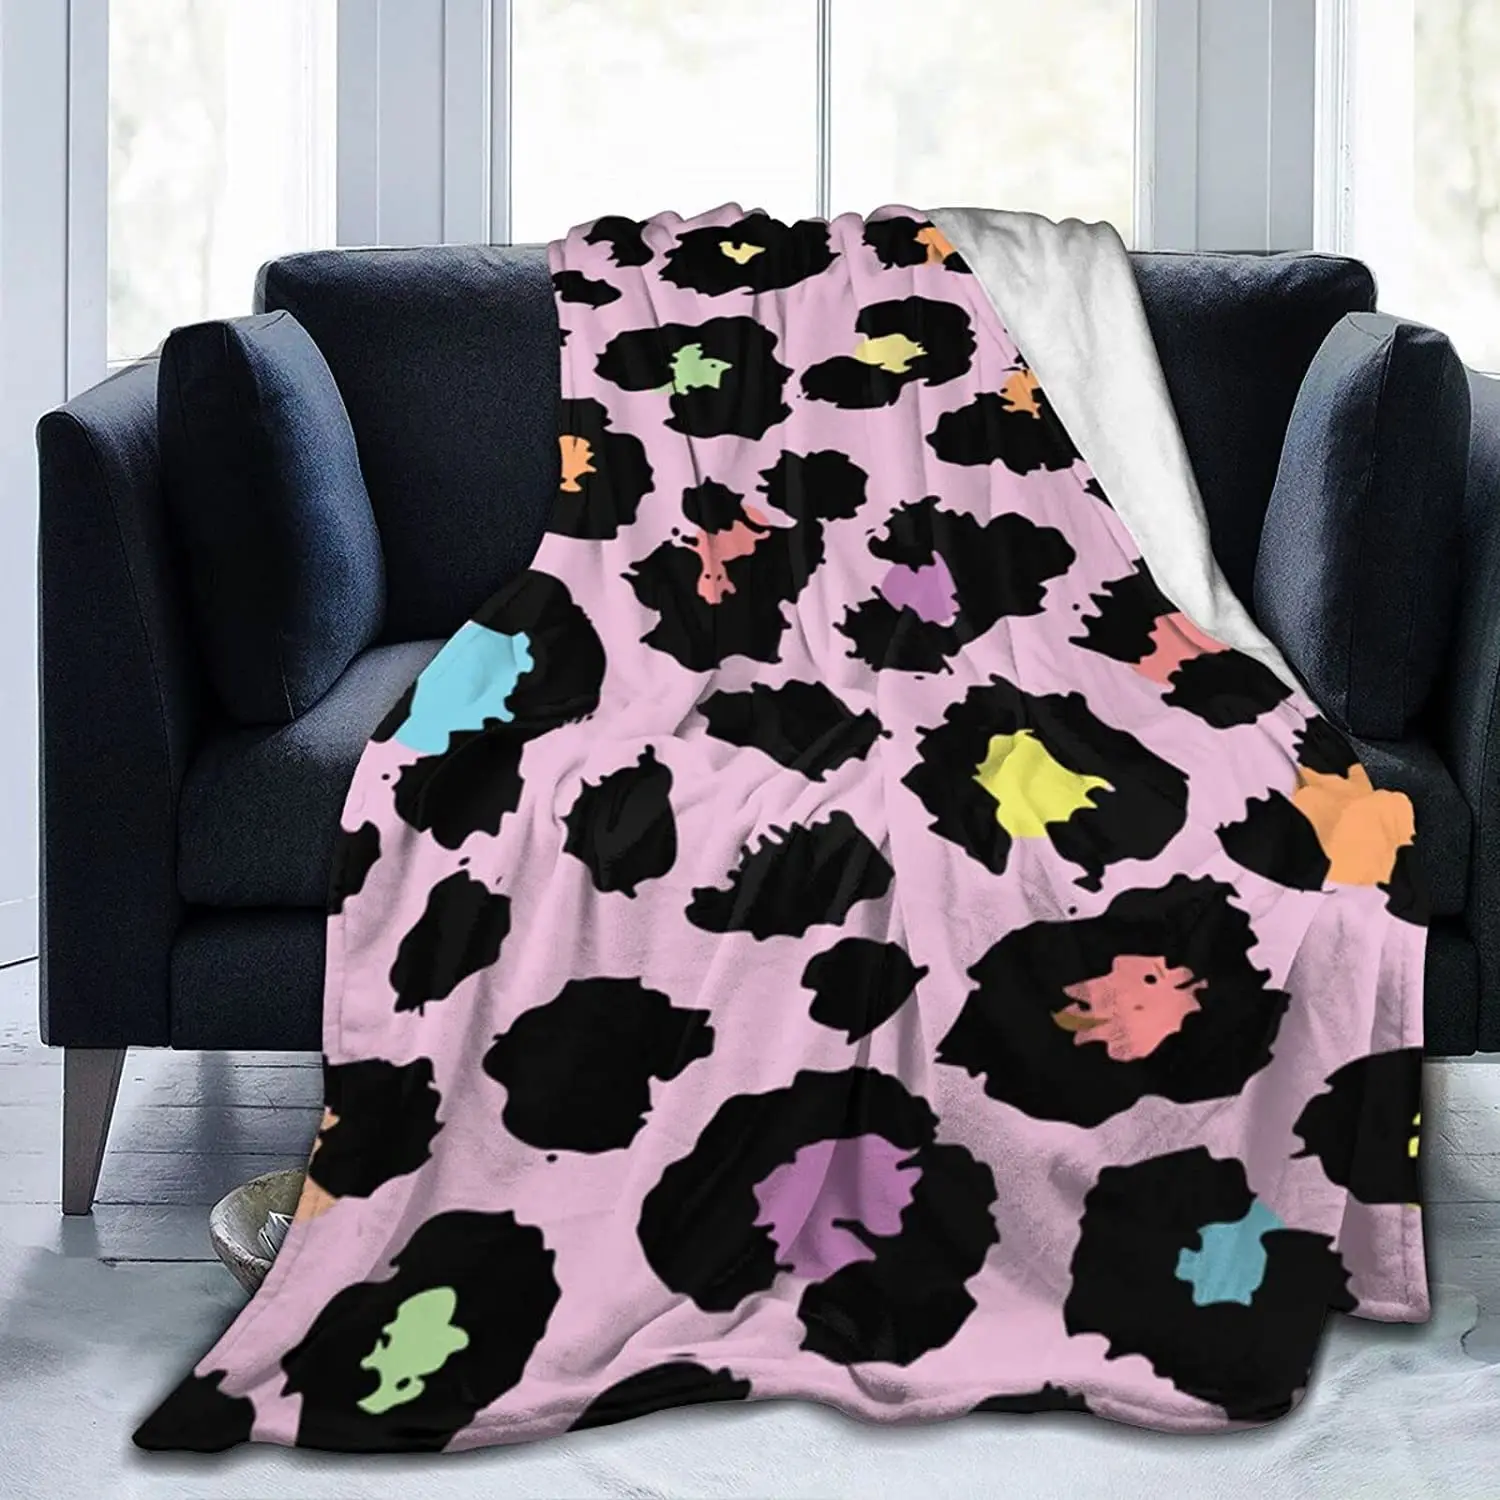 

Colorful Leopard Pattern Throw Blanket Lightweight Microfiber Flannel Fleece Blankets for Bed Couch Sofa Blanket Quilt 60"X50"